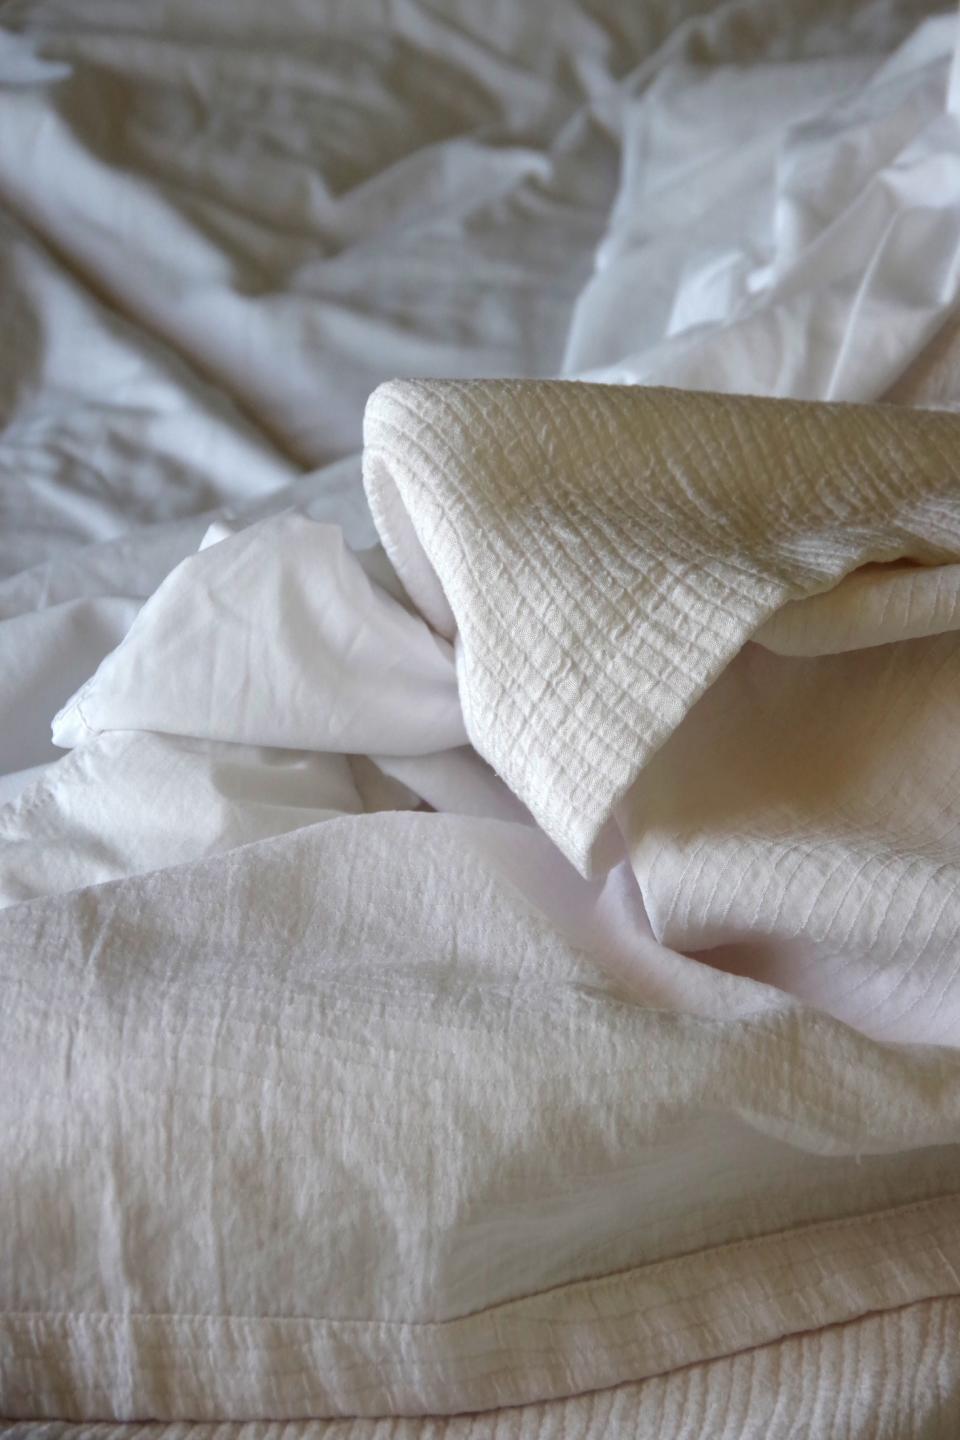 Sheets should be changed once a week at minimum, according to some cleaning experts.